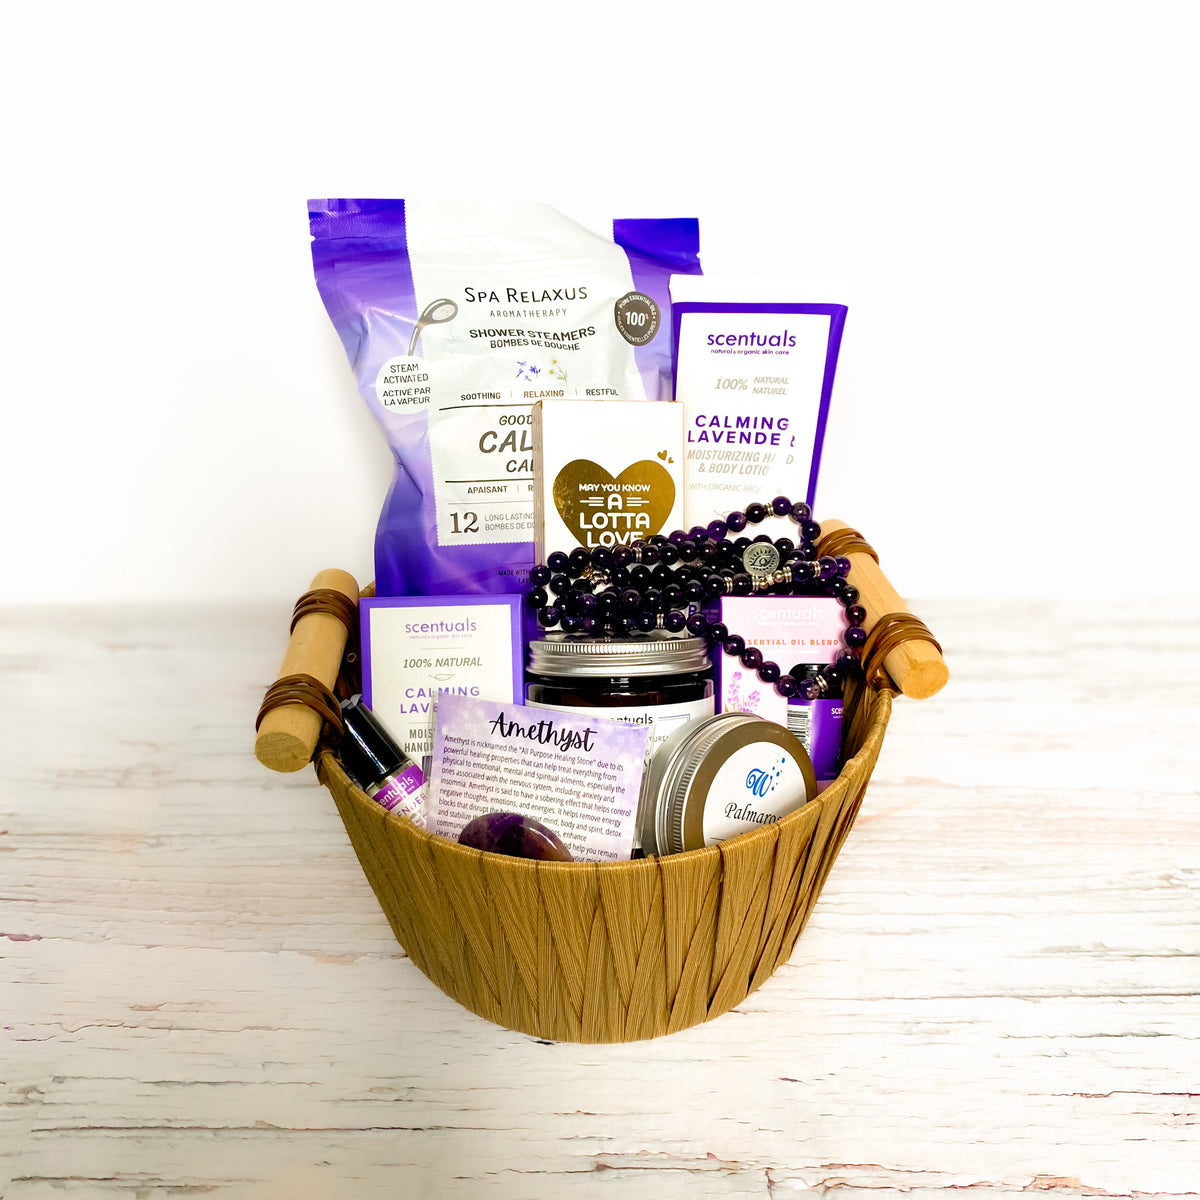 Lavender Lullaby Wellness Basket - Anxiety Gone